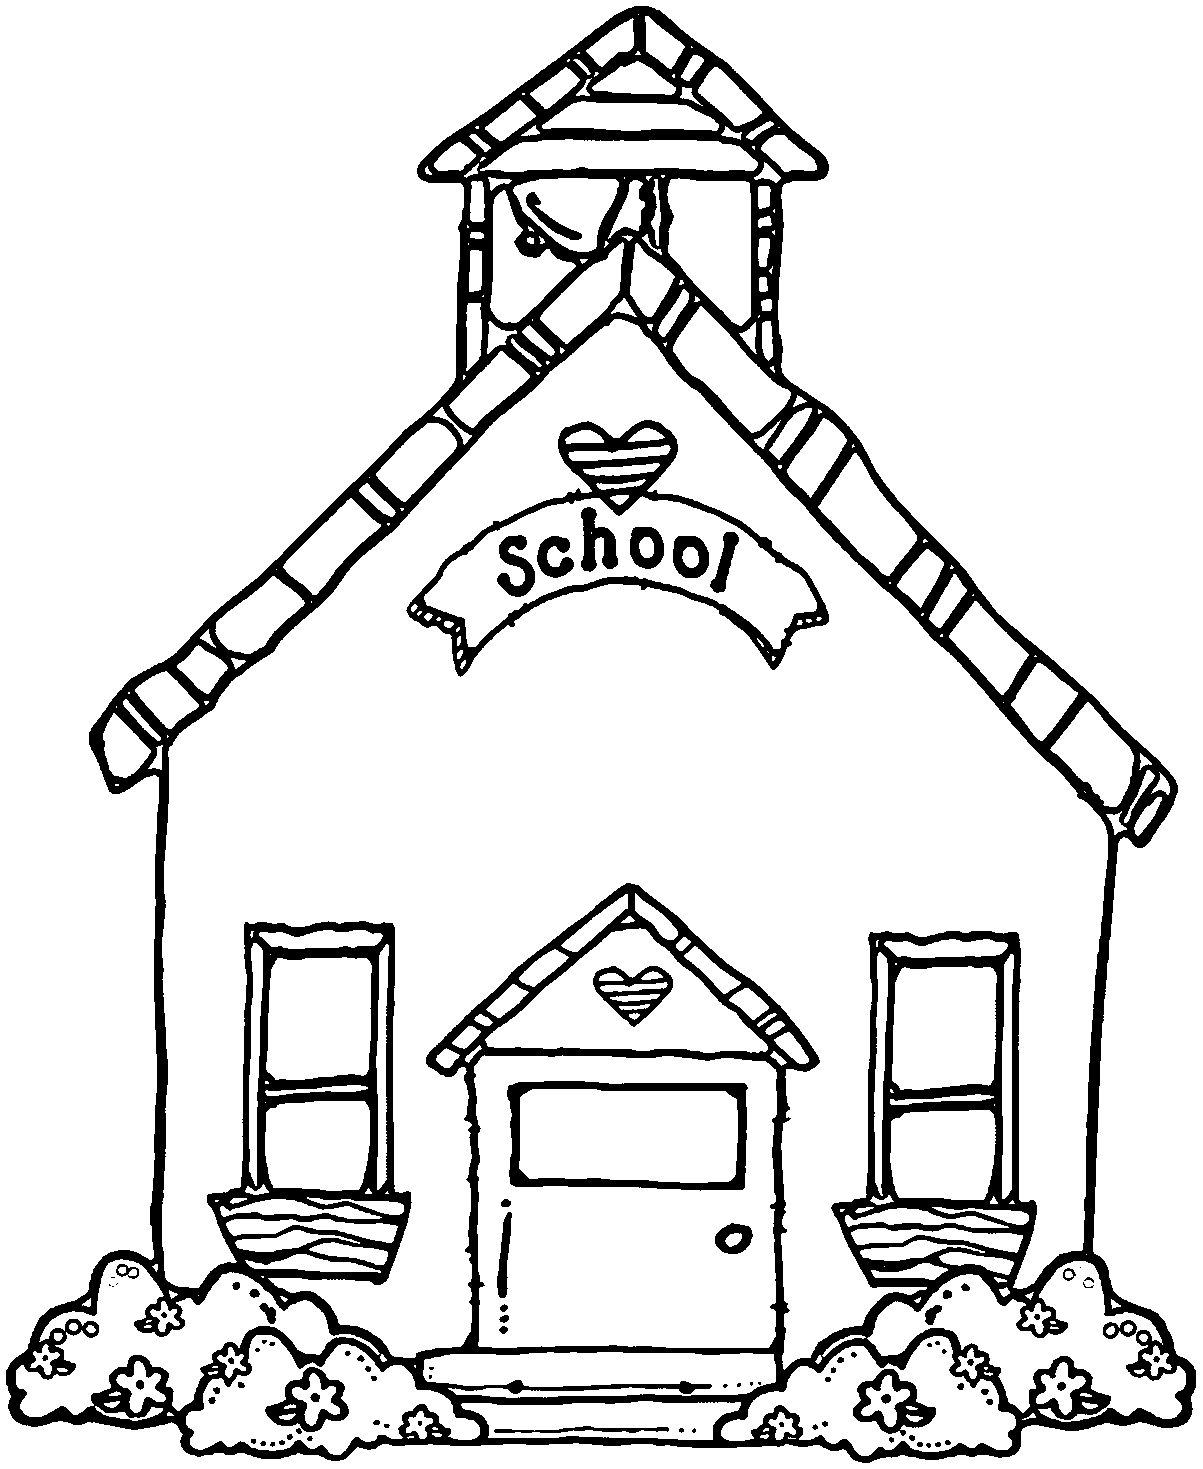 free black and white school house clipart - photo #2